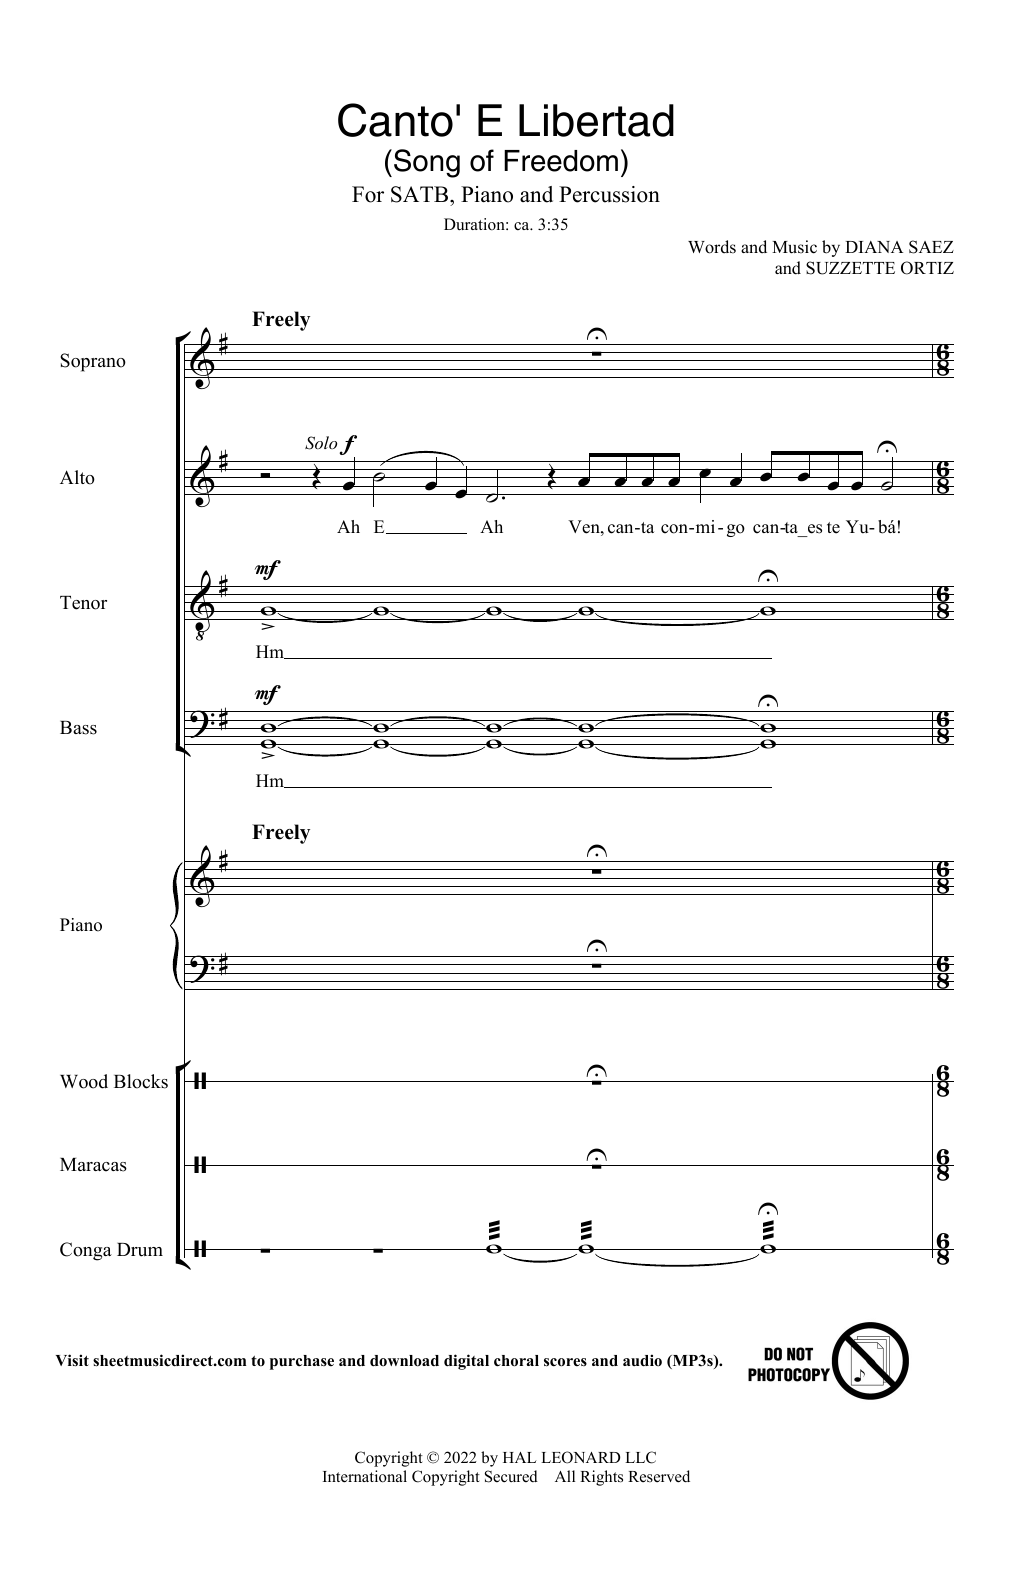 Download Diana Saez & Suzzette Ortiz Canto' E Libertad (Song of Freedom) Sheet Music